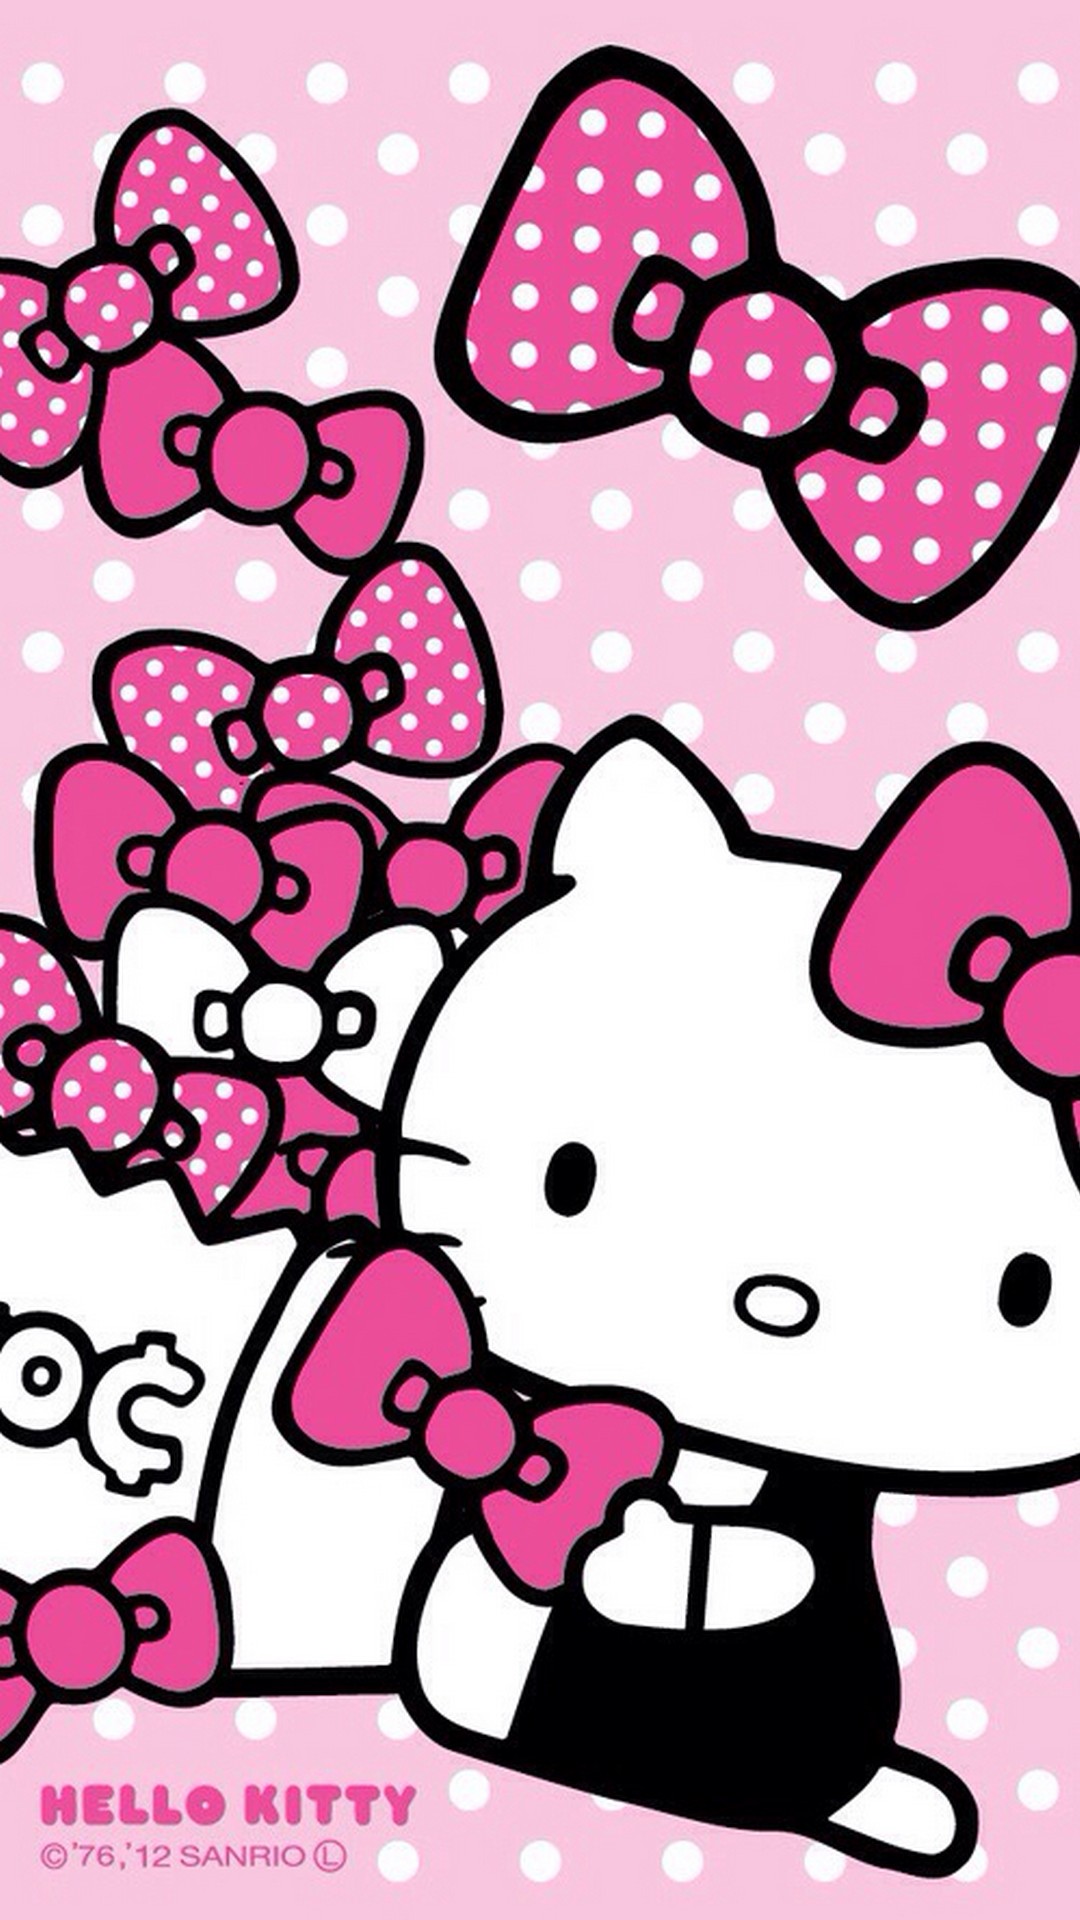 Wallpaper Sanrio Hello Kitty iPhone with image resolution 1080x1920 pixel. You can use this wallpaper as background for your desktop Computer Screensavers, Android or iPhone smartphones